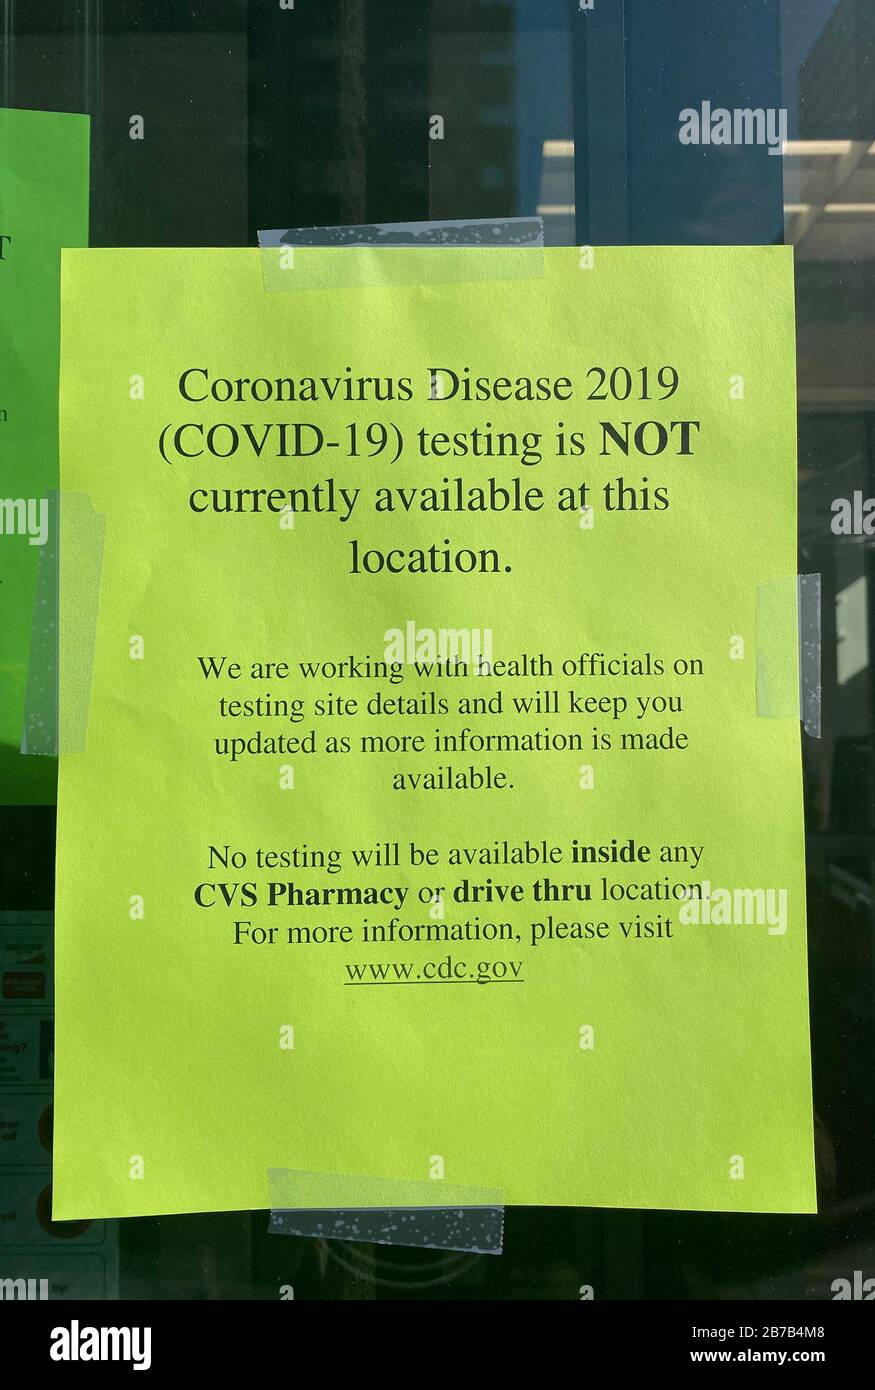 new york ny usa 14th mar 2020 view of cvs pharmacy on upper east side stating location does not offer coronavirus testing on march 14 2020 new york city credit rainmaker photosmedia punchalamy live news 2B7B4M8